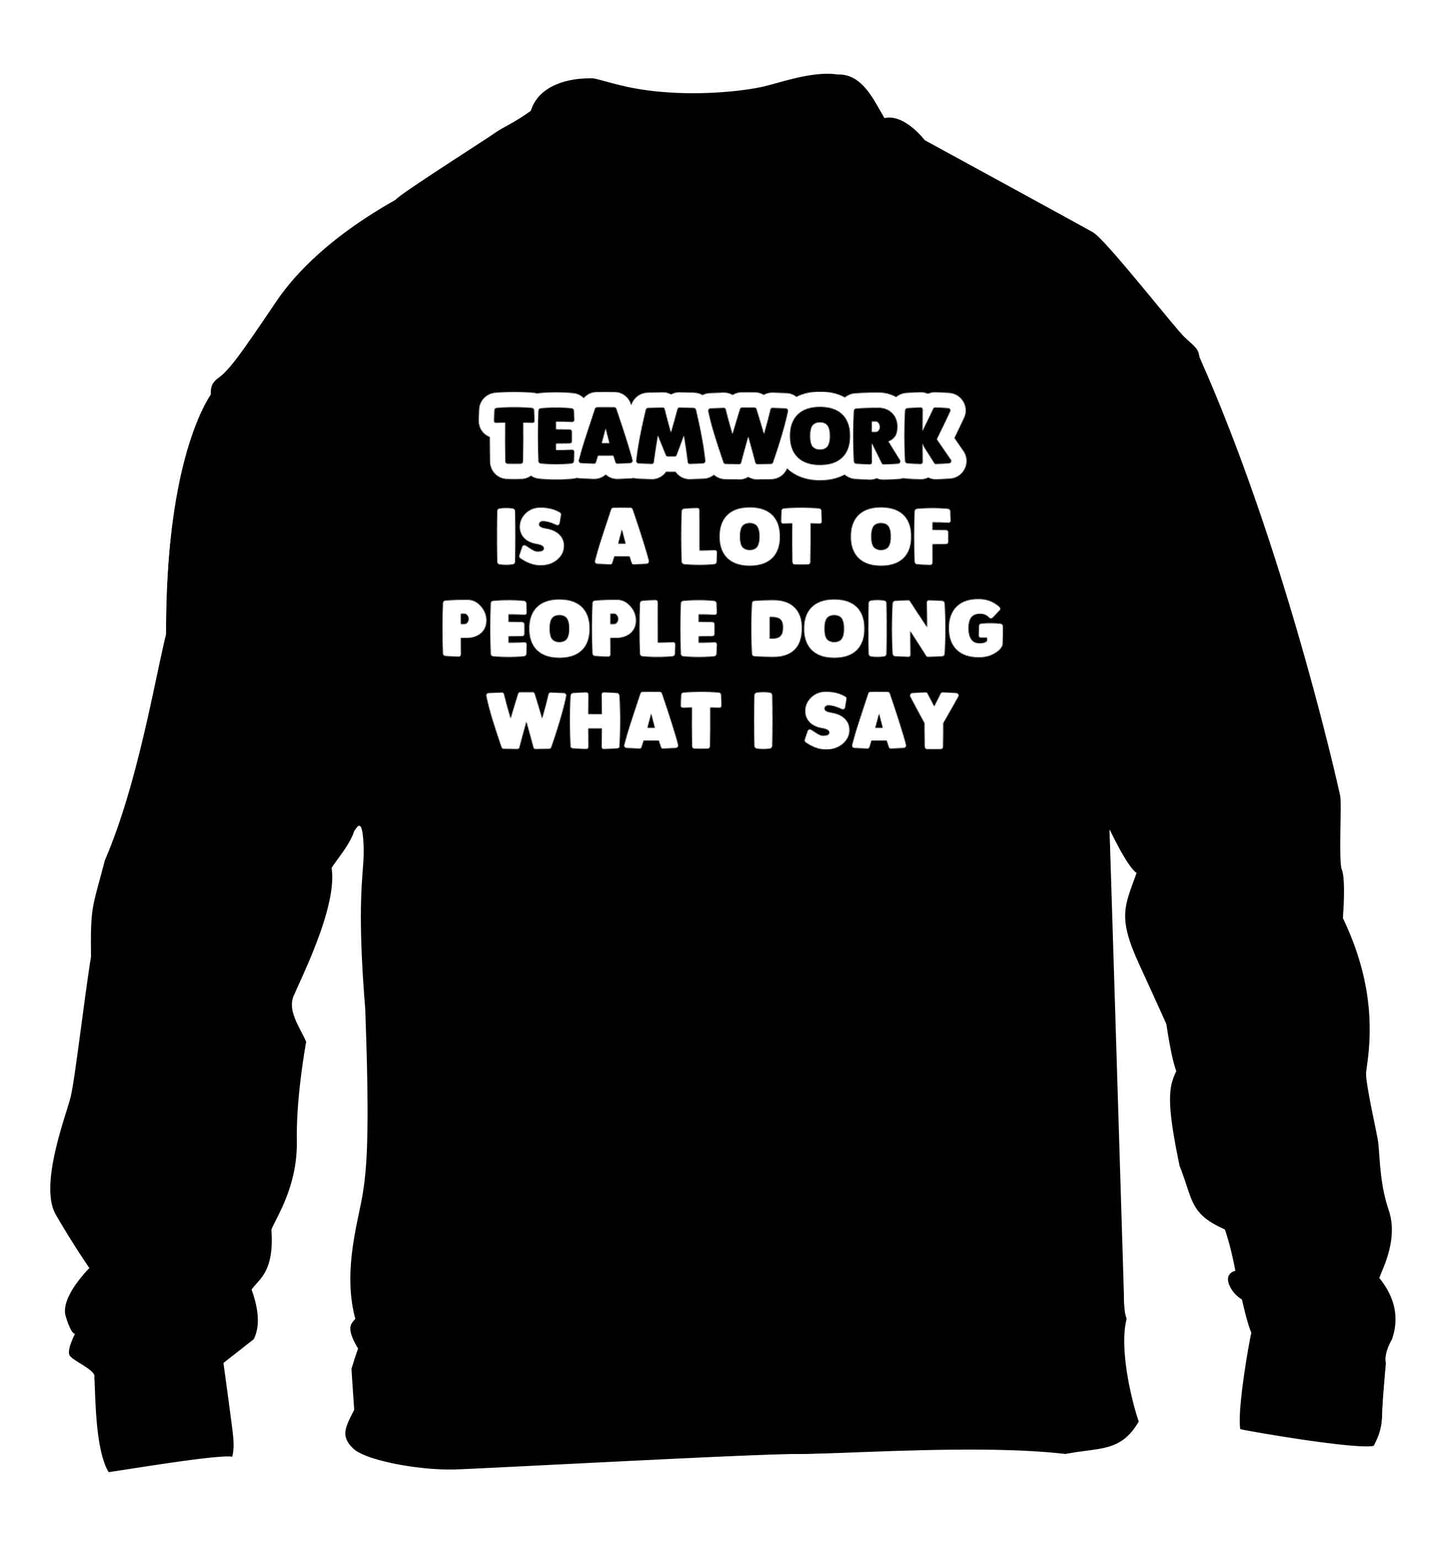 Teamwork is a lot of people doing what I say children's black sweater 12-13 Years